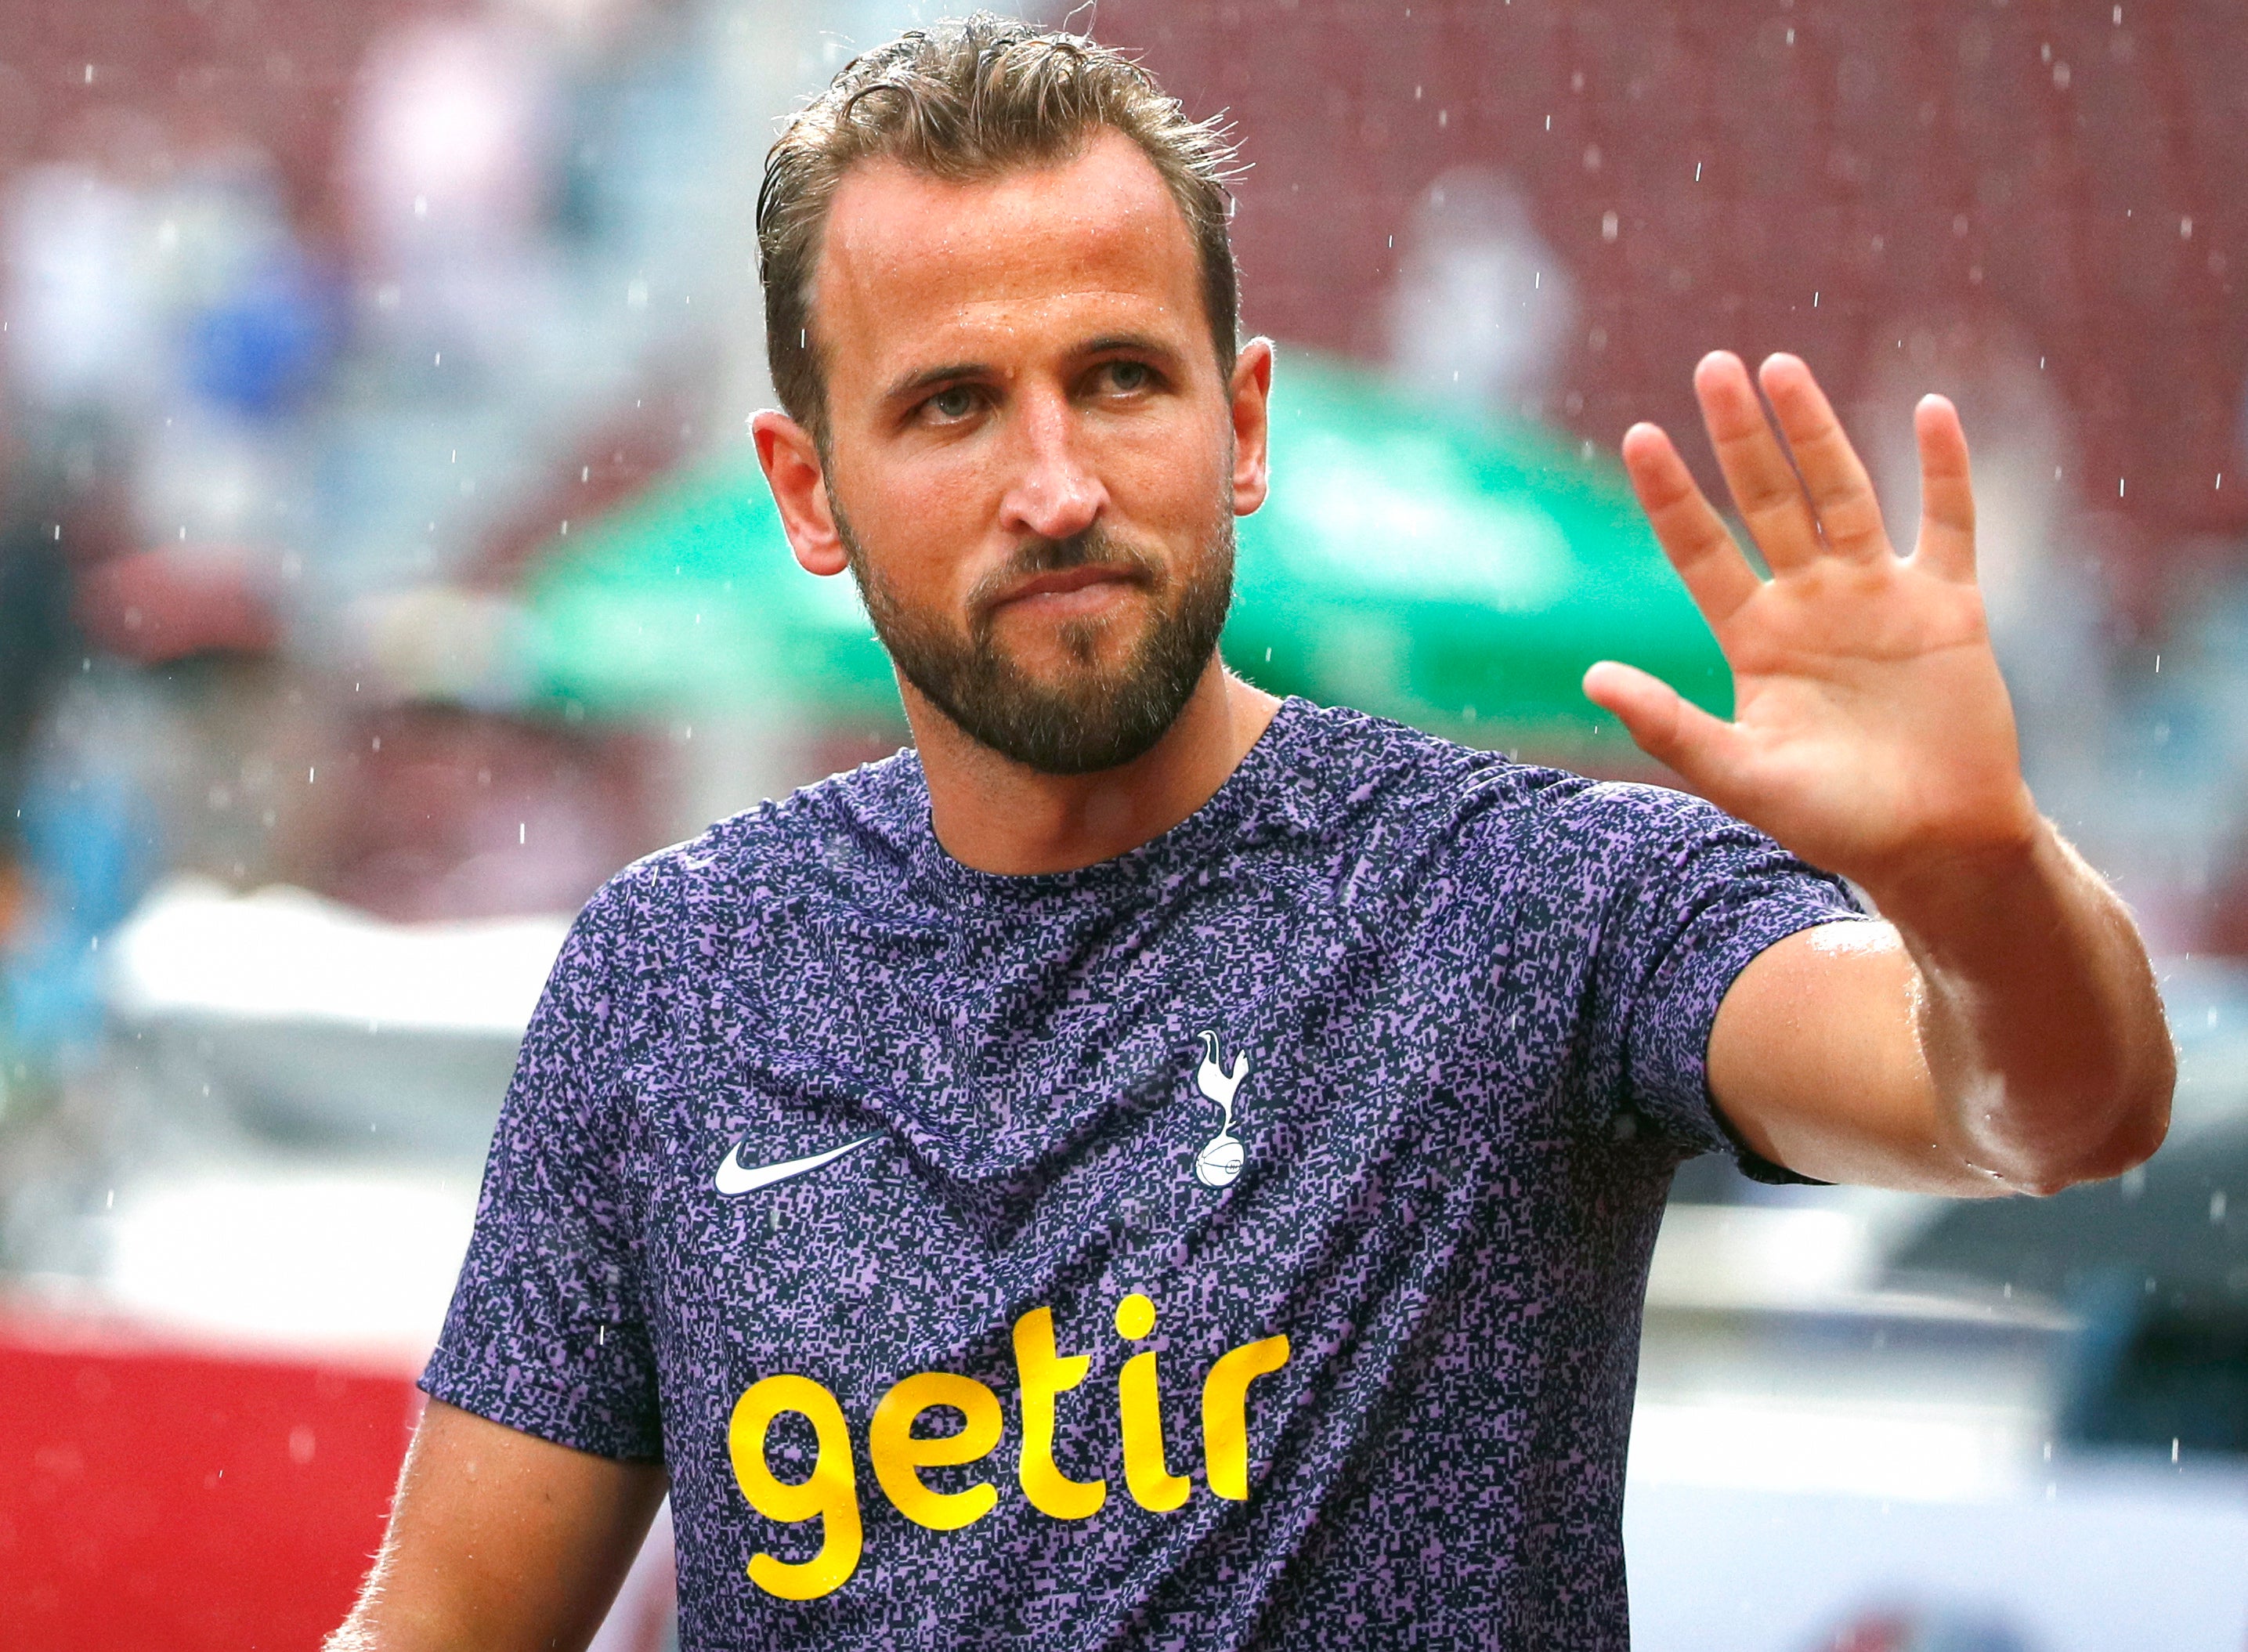 Harry Kane’s future remains unresolved going into the final year of his contract